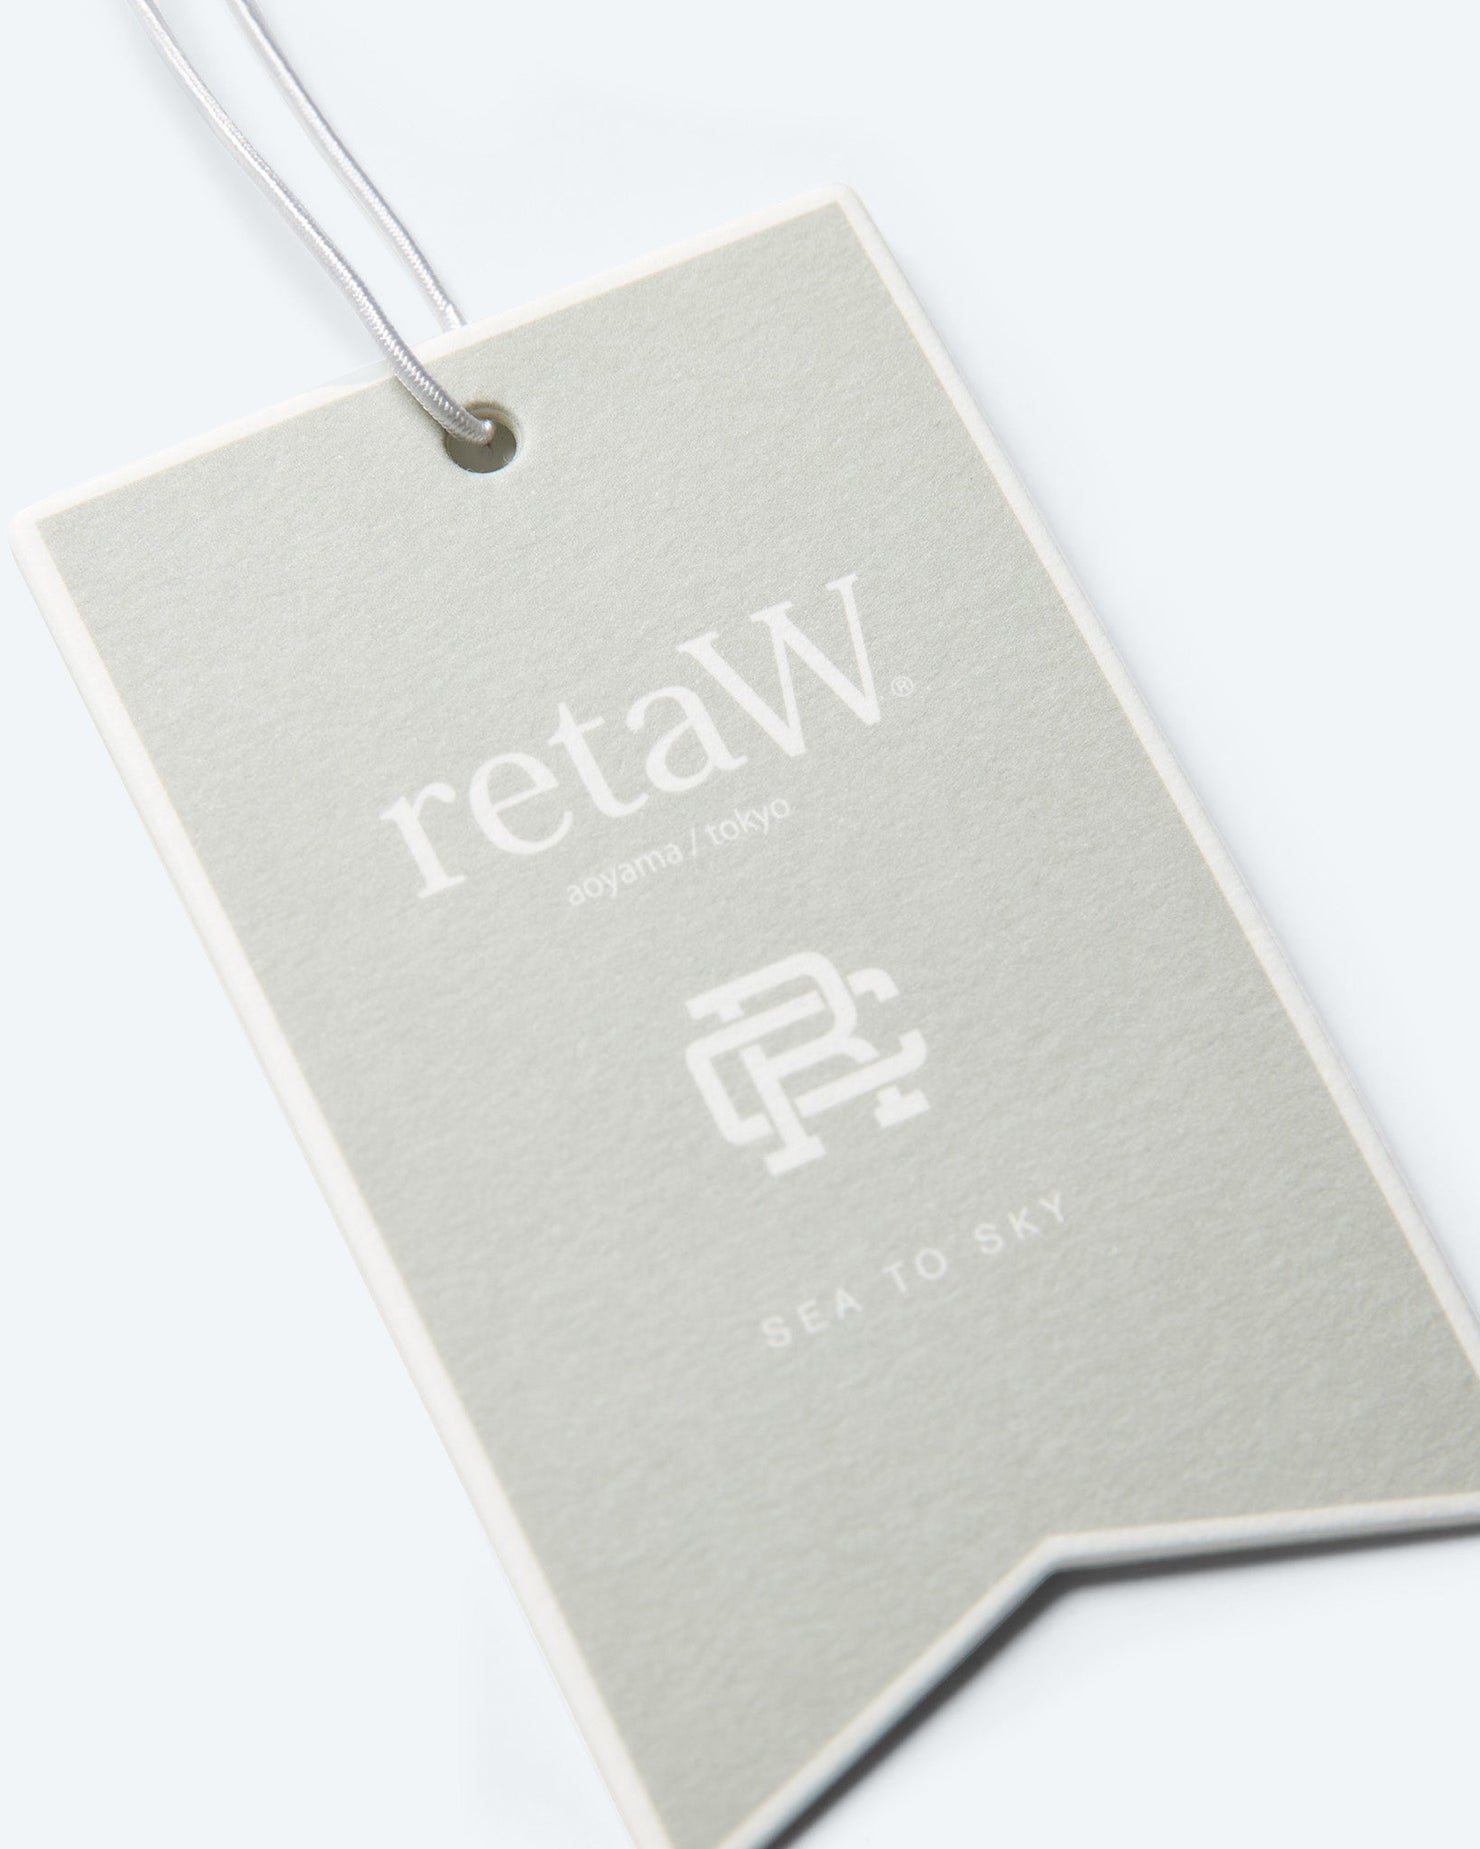 Sea to Sky Locker Tag | Reigning Champ